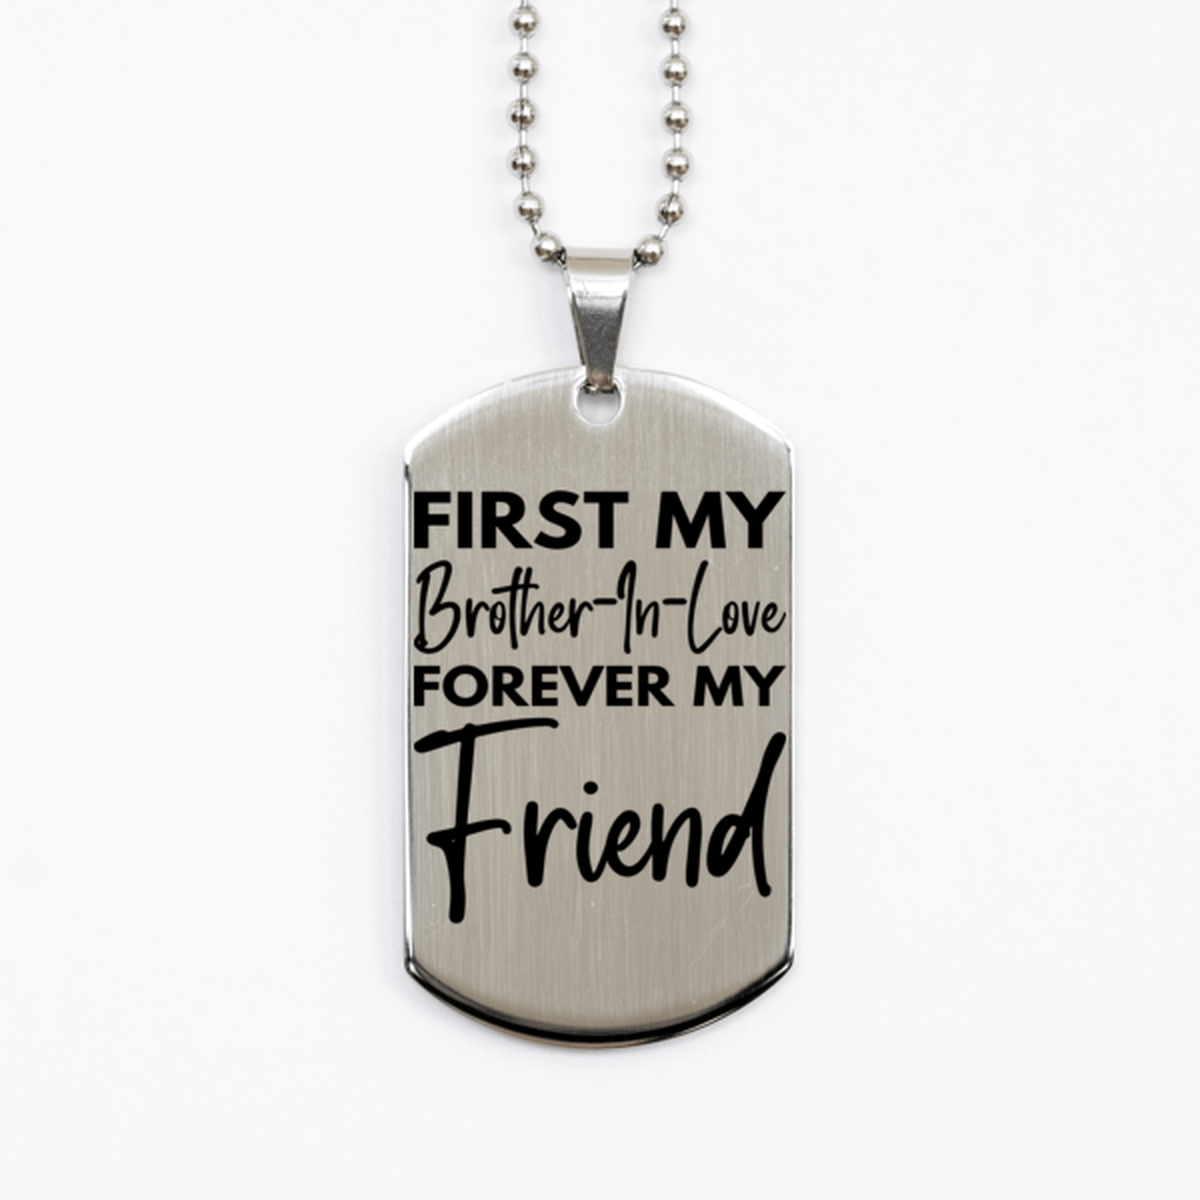 Inspirational Brother-In-Love Silver Dog Tag Necklace, First My Brother-In-Love Forever My Friend, Best Birthday Gifts for Brother-In-Love